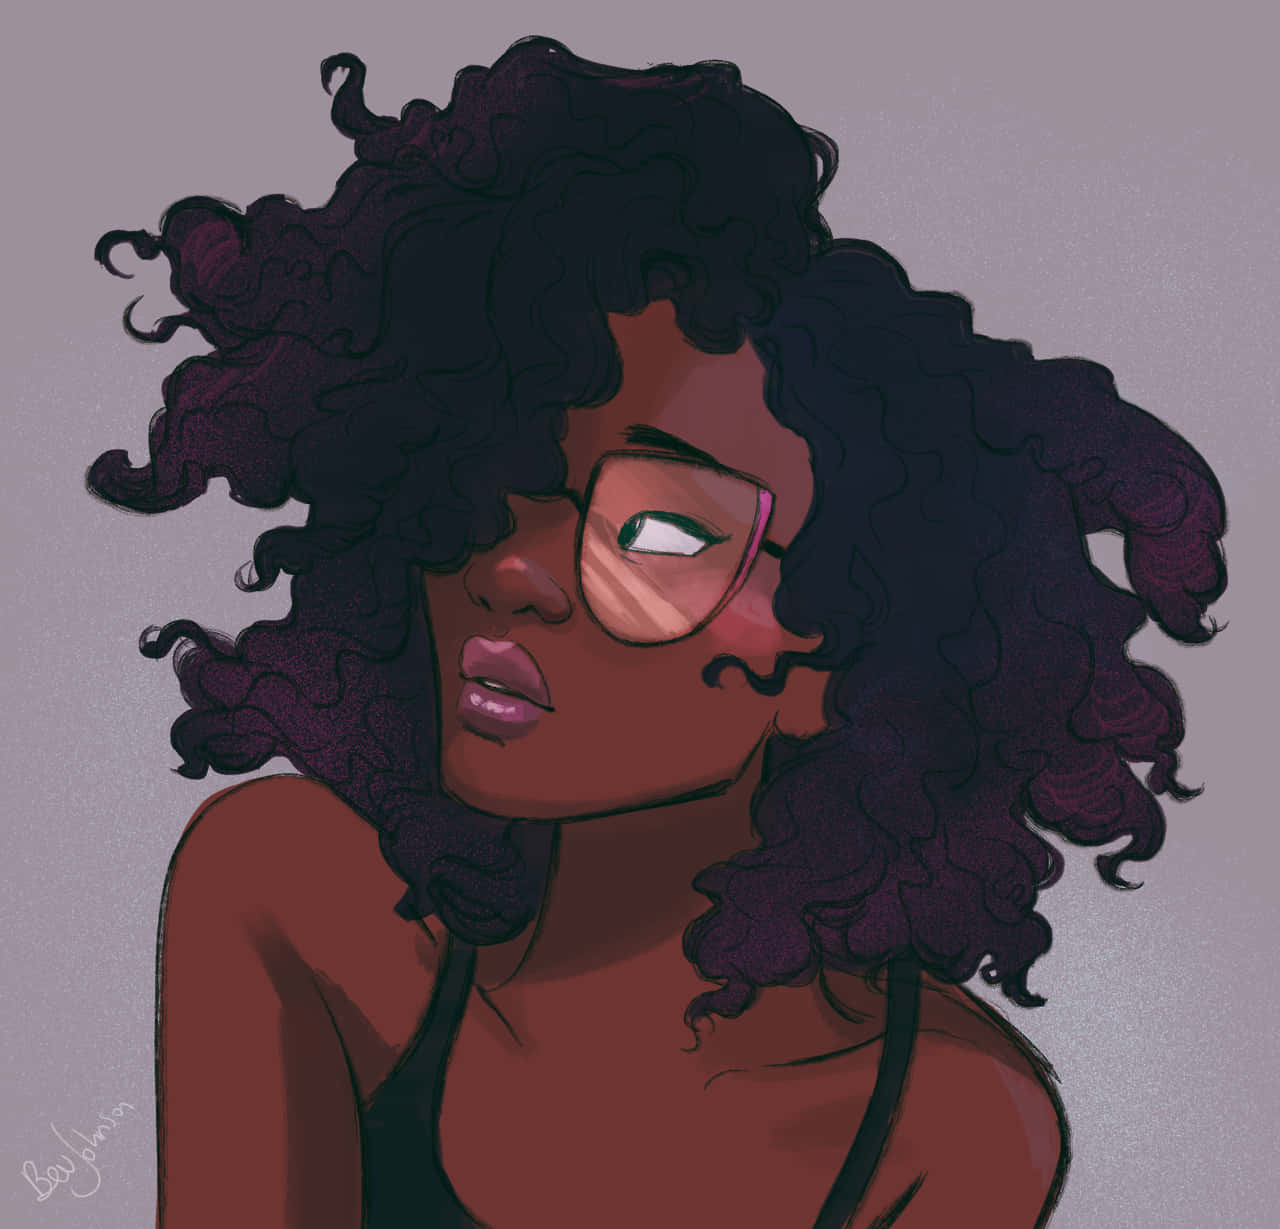 A Black Woman With Curly Hair And Glasses Wallpaper